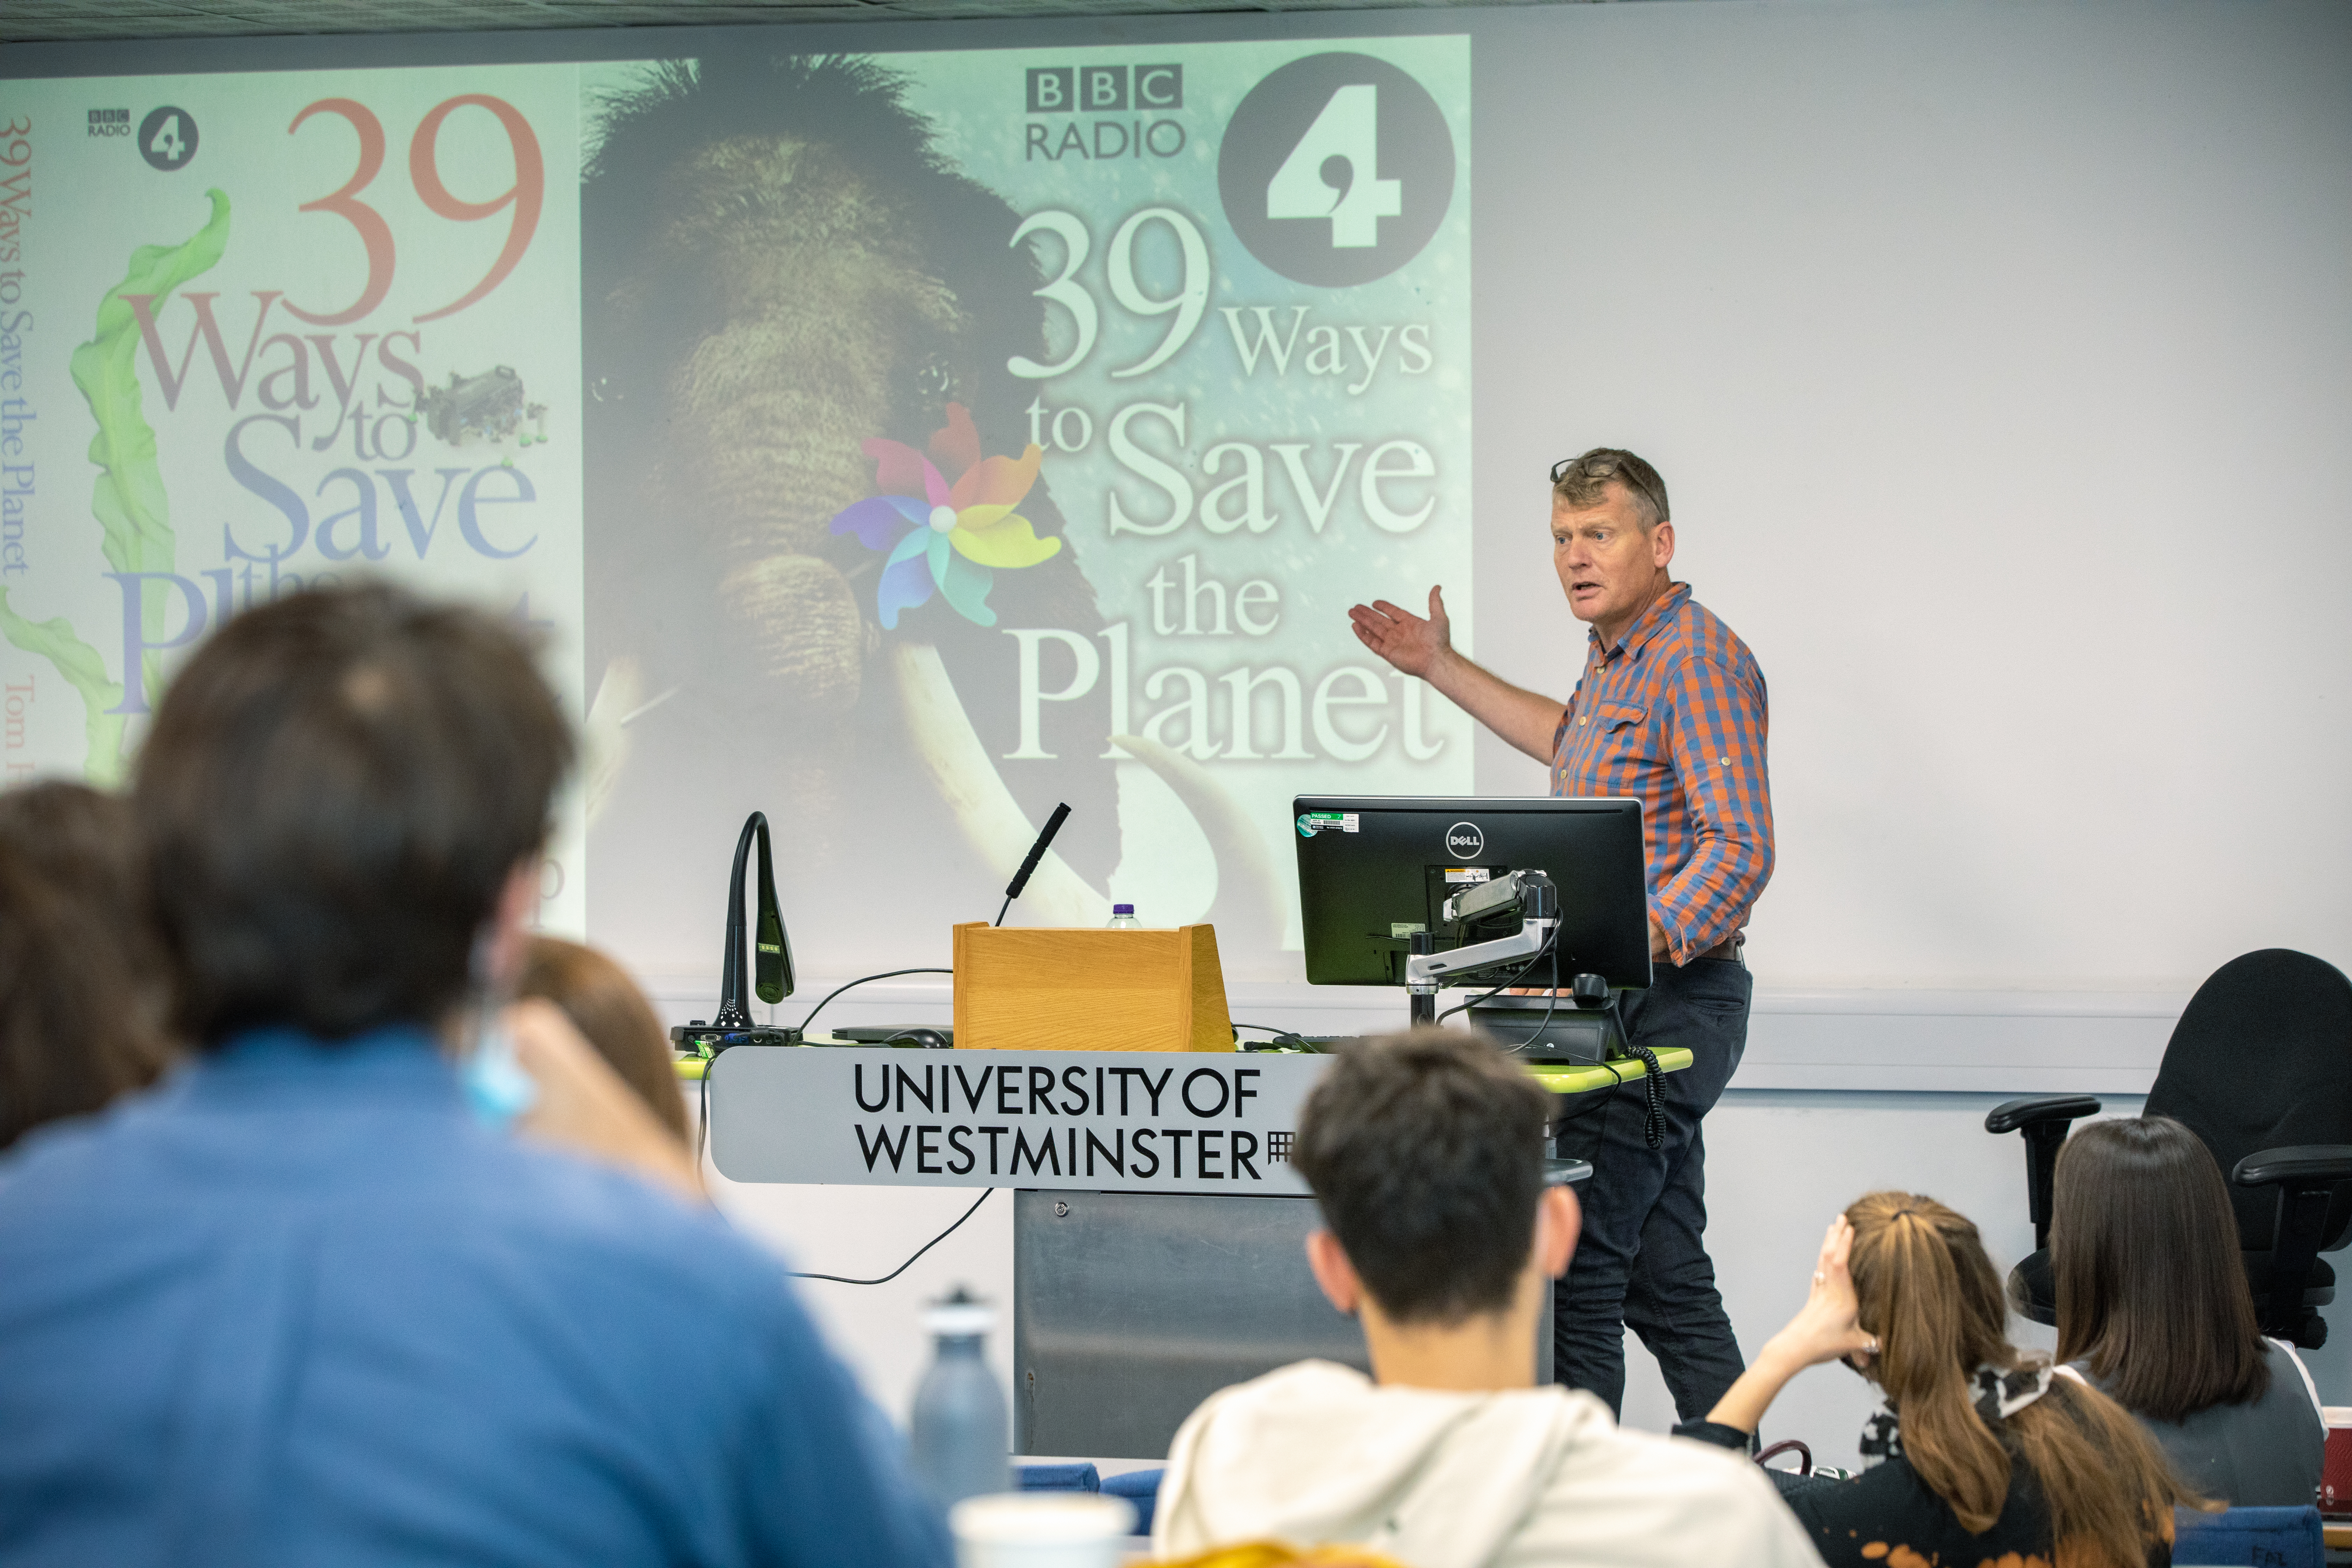 Tom Heap, BBC, 39 ways to save the planet